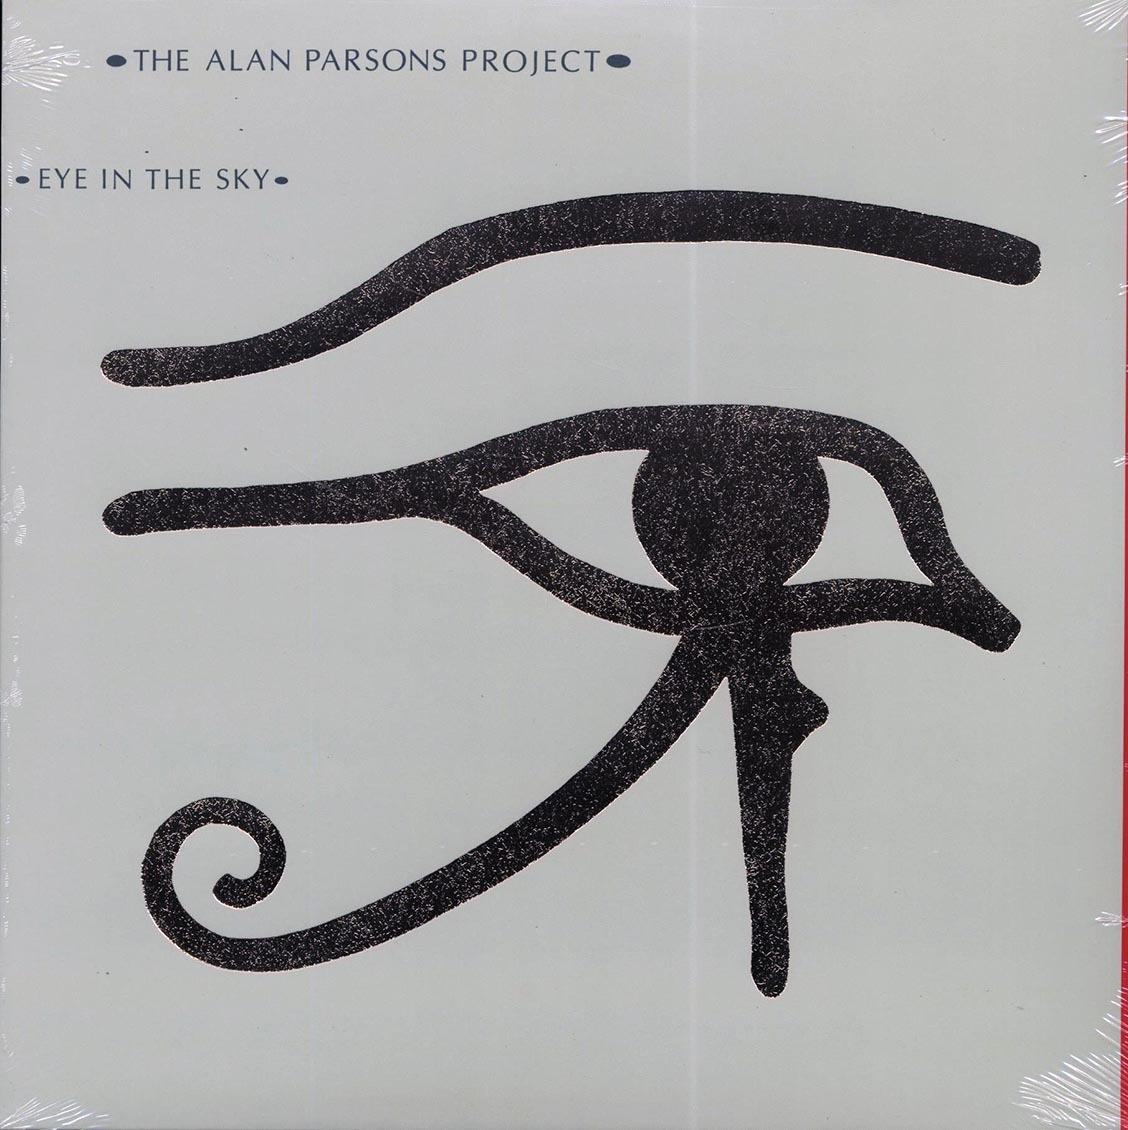 The Alan Parsons Project - Eye In The Sky (remastered)